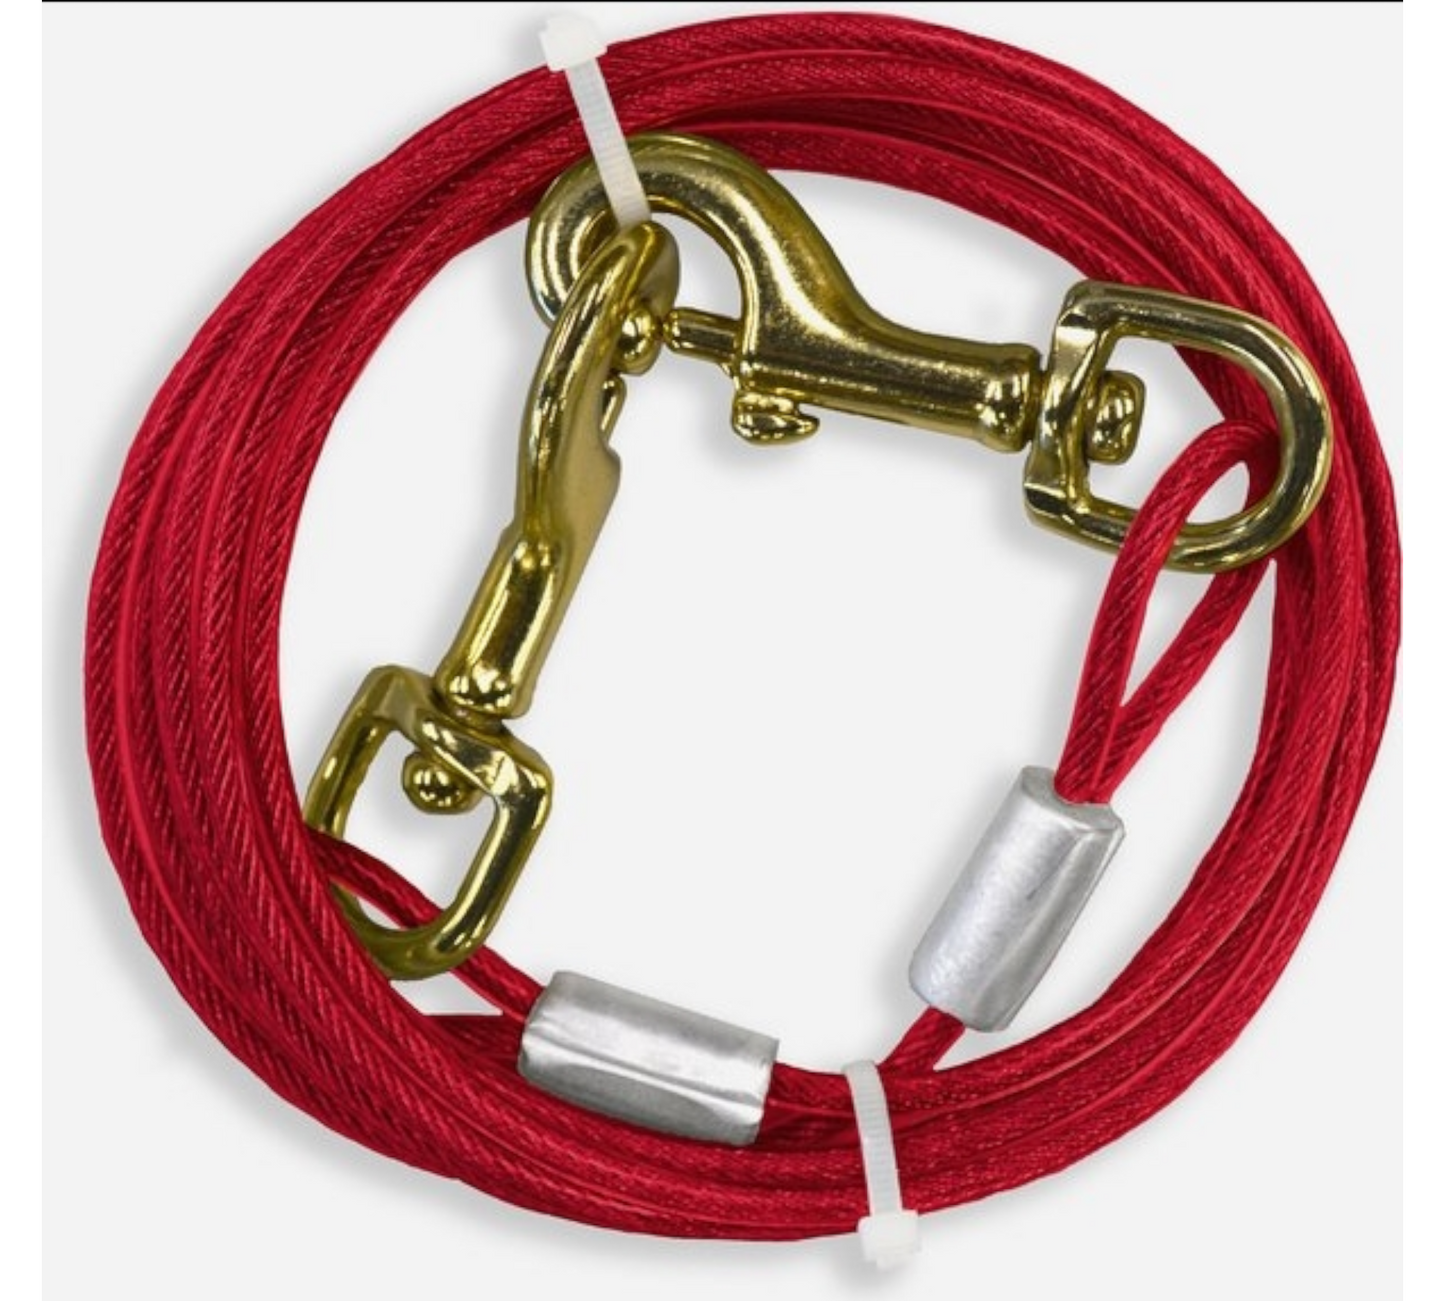 Canine's World Dog Tie Out Cables Four Paws Dog Tie Out Cable - Medium Weight - Red Four Paws